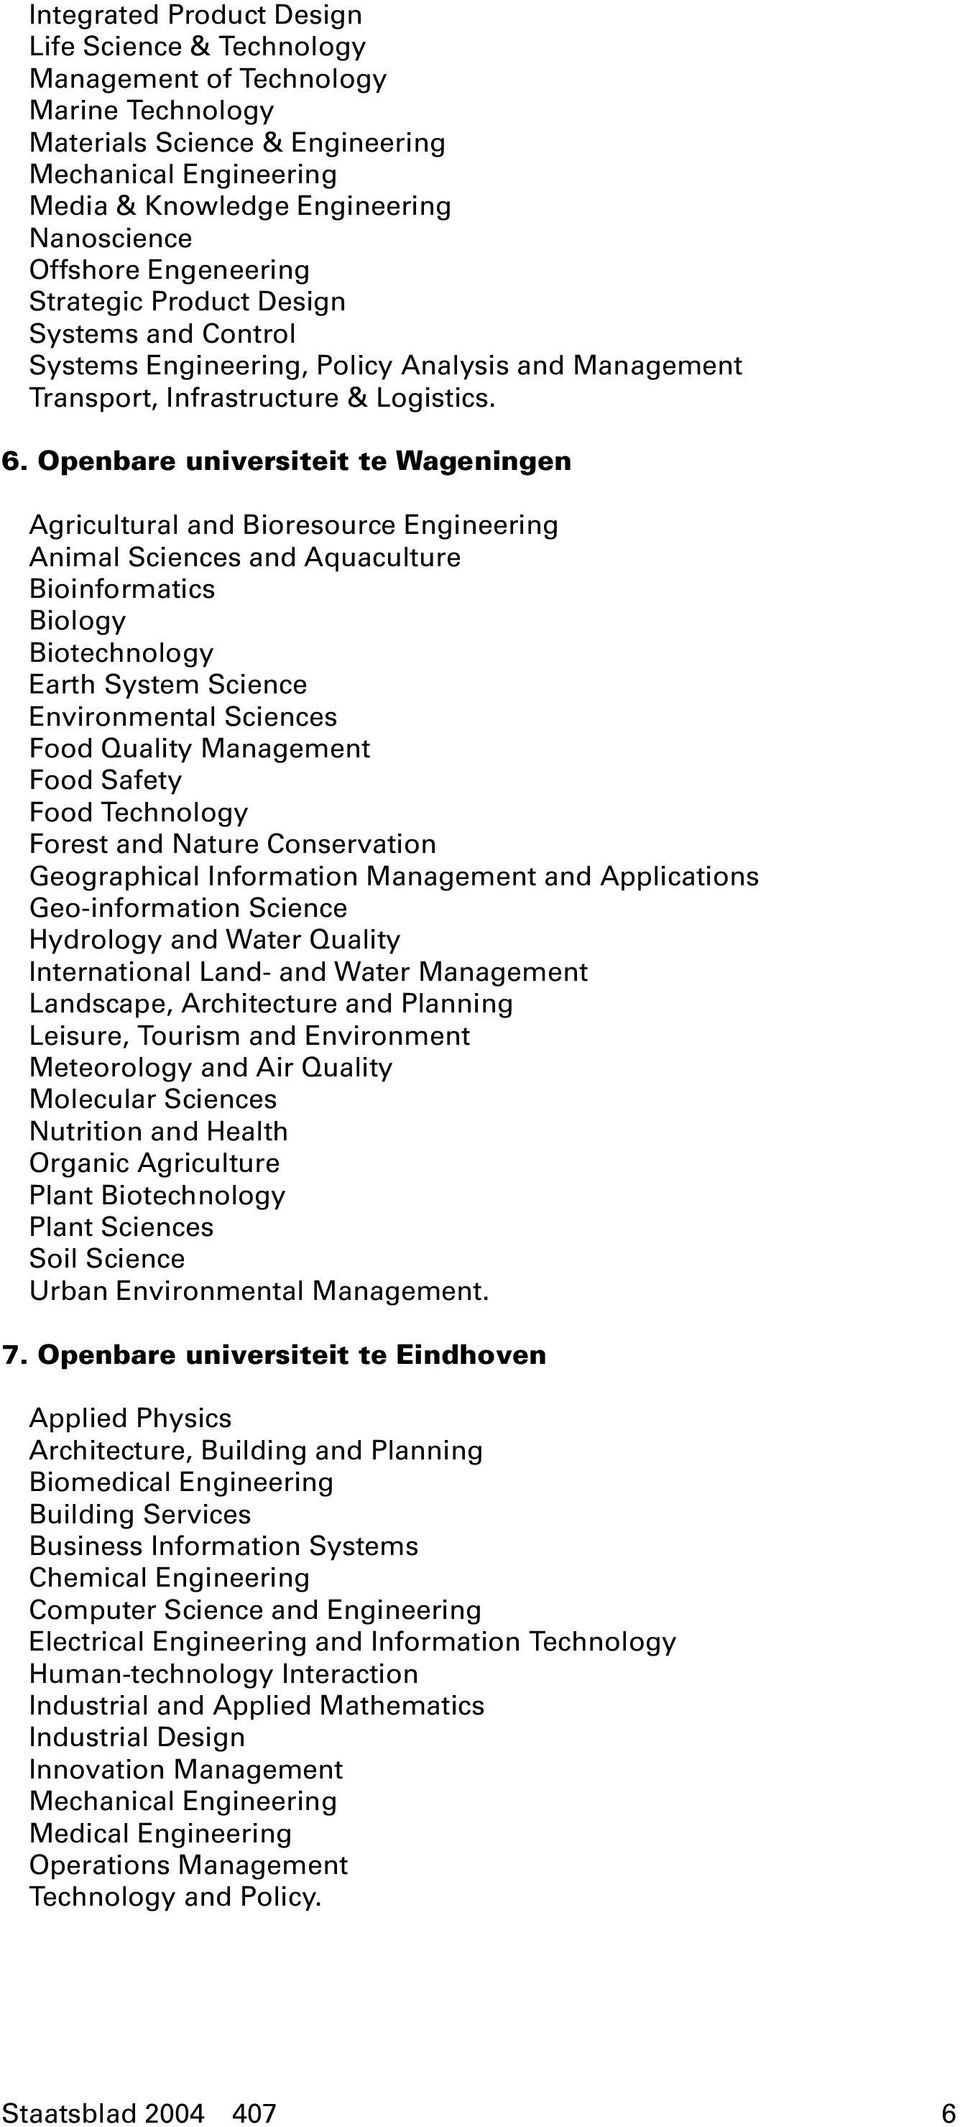 Openbare universiteit te Wageningen Agricultural and Bioresource Engineering Animal Sciences and Aquaculture Bioinformatics Biology Biotechnology Earth System Science Environmental Sciences Food